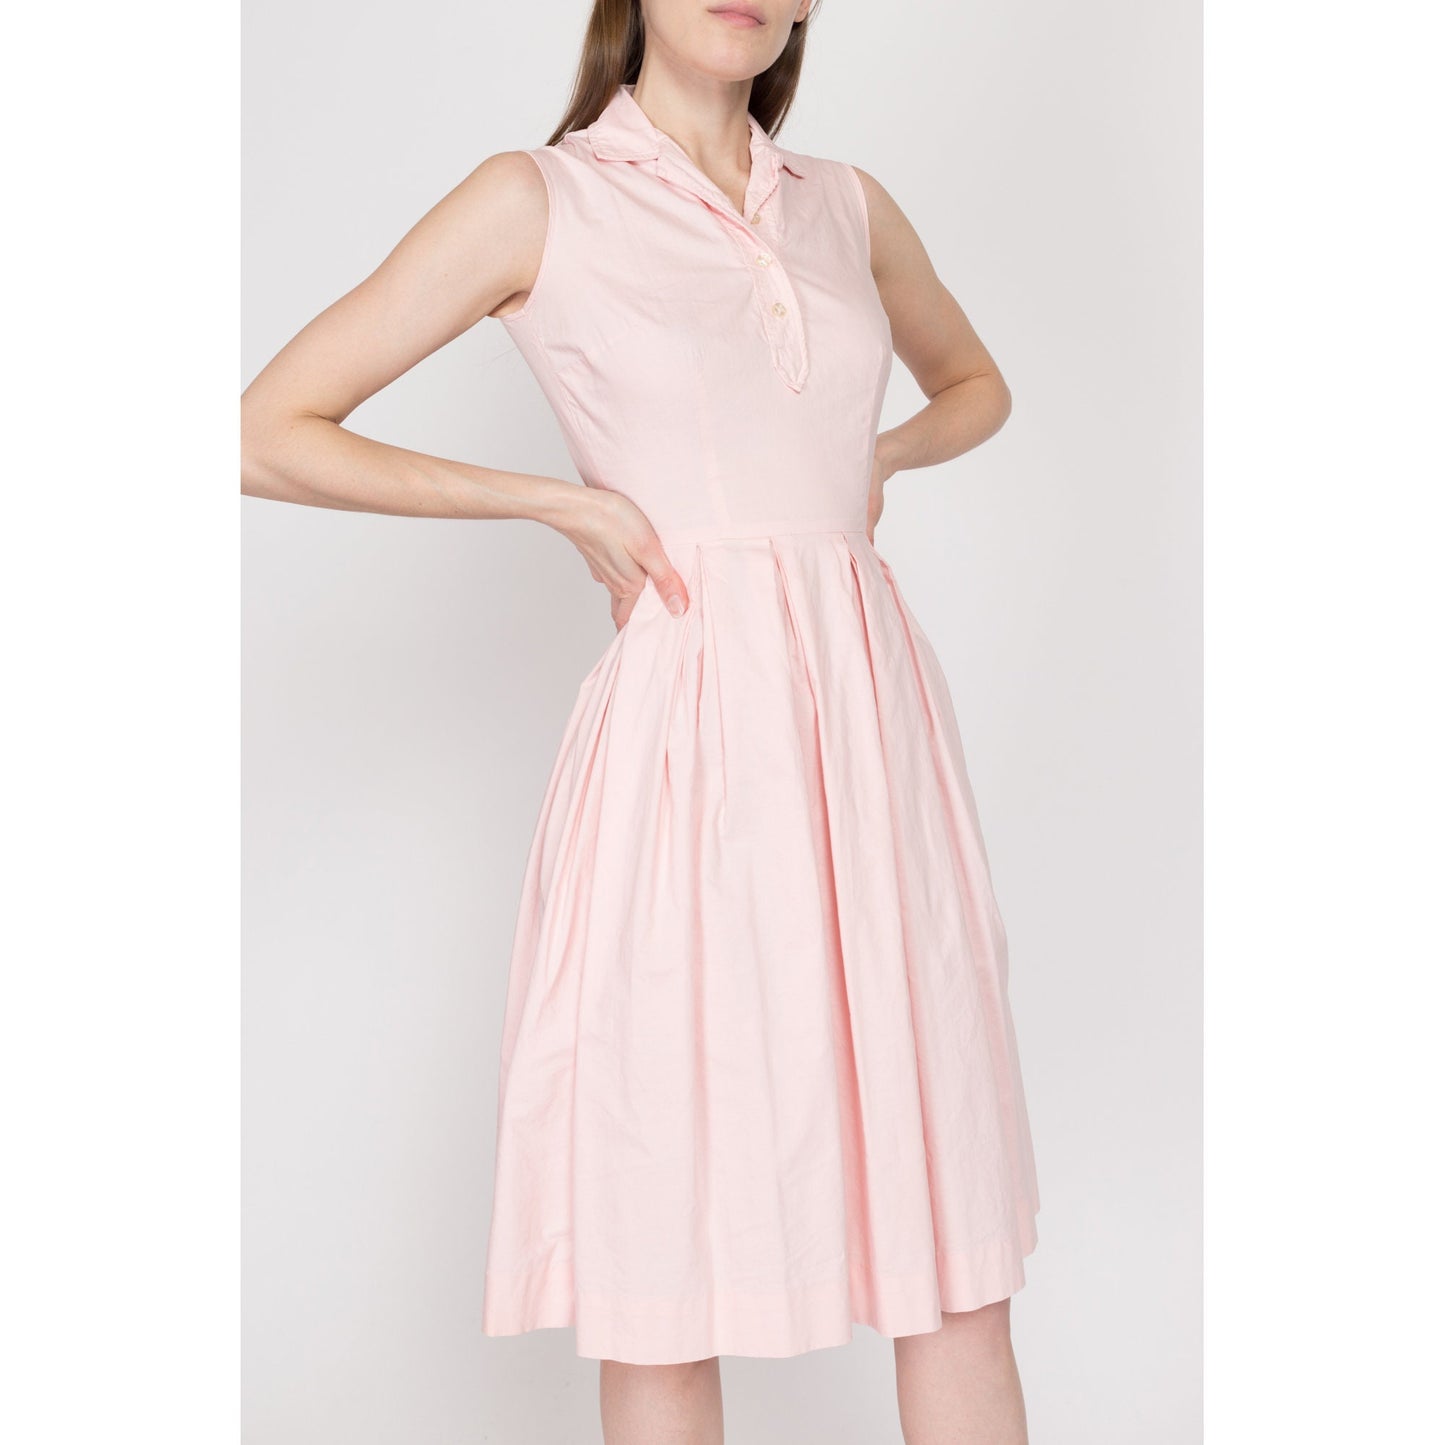 Petite XXS-XS 1950s Bobbie Brooks Pink Fit & Flare Day Dress | Vintage 50s Sleeveless Collared Pleated Housewife Mini Sundress